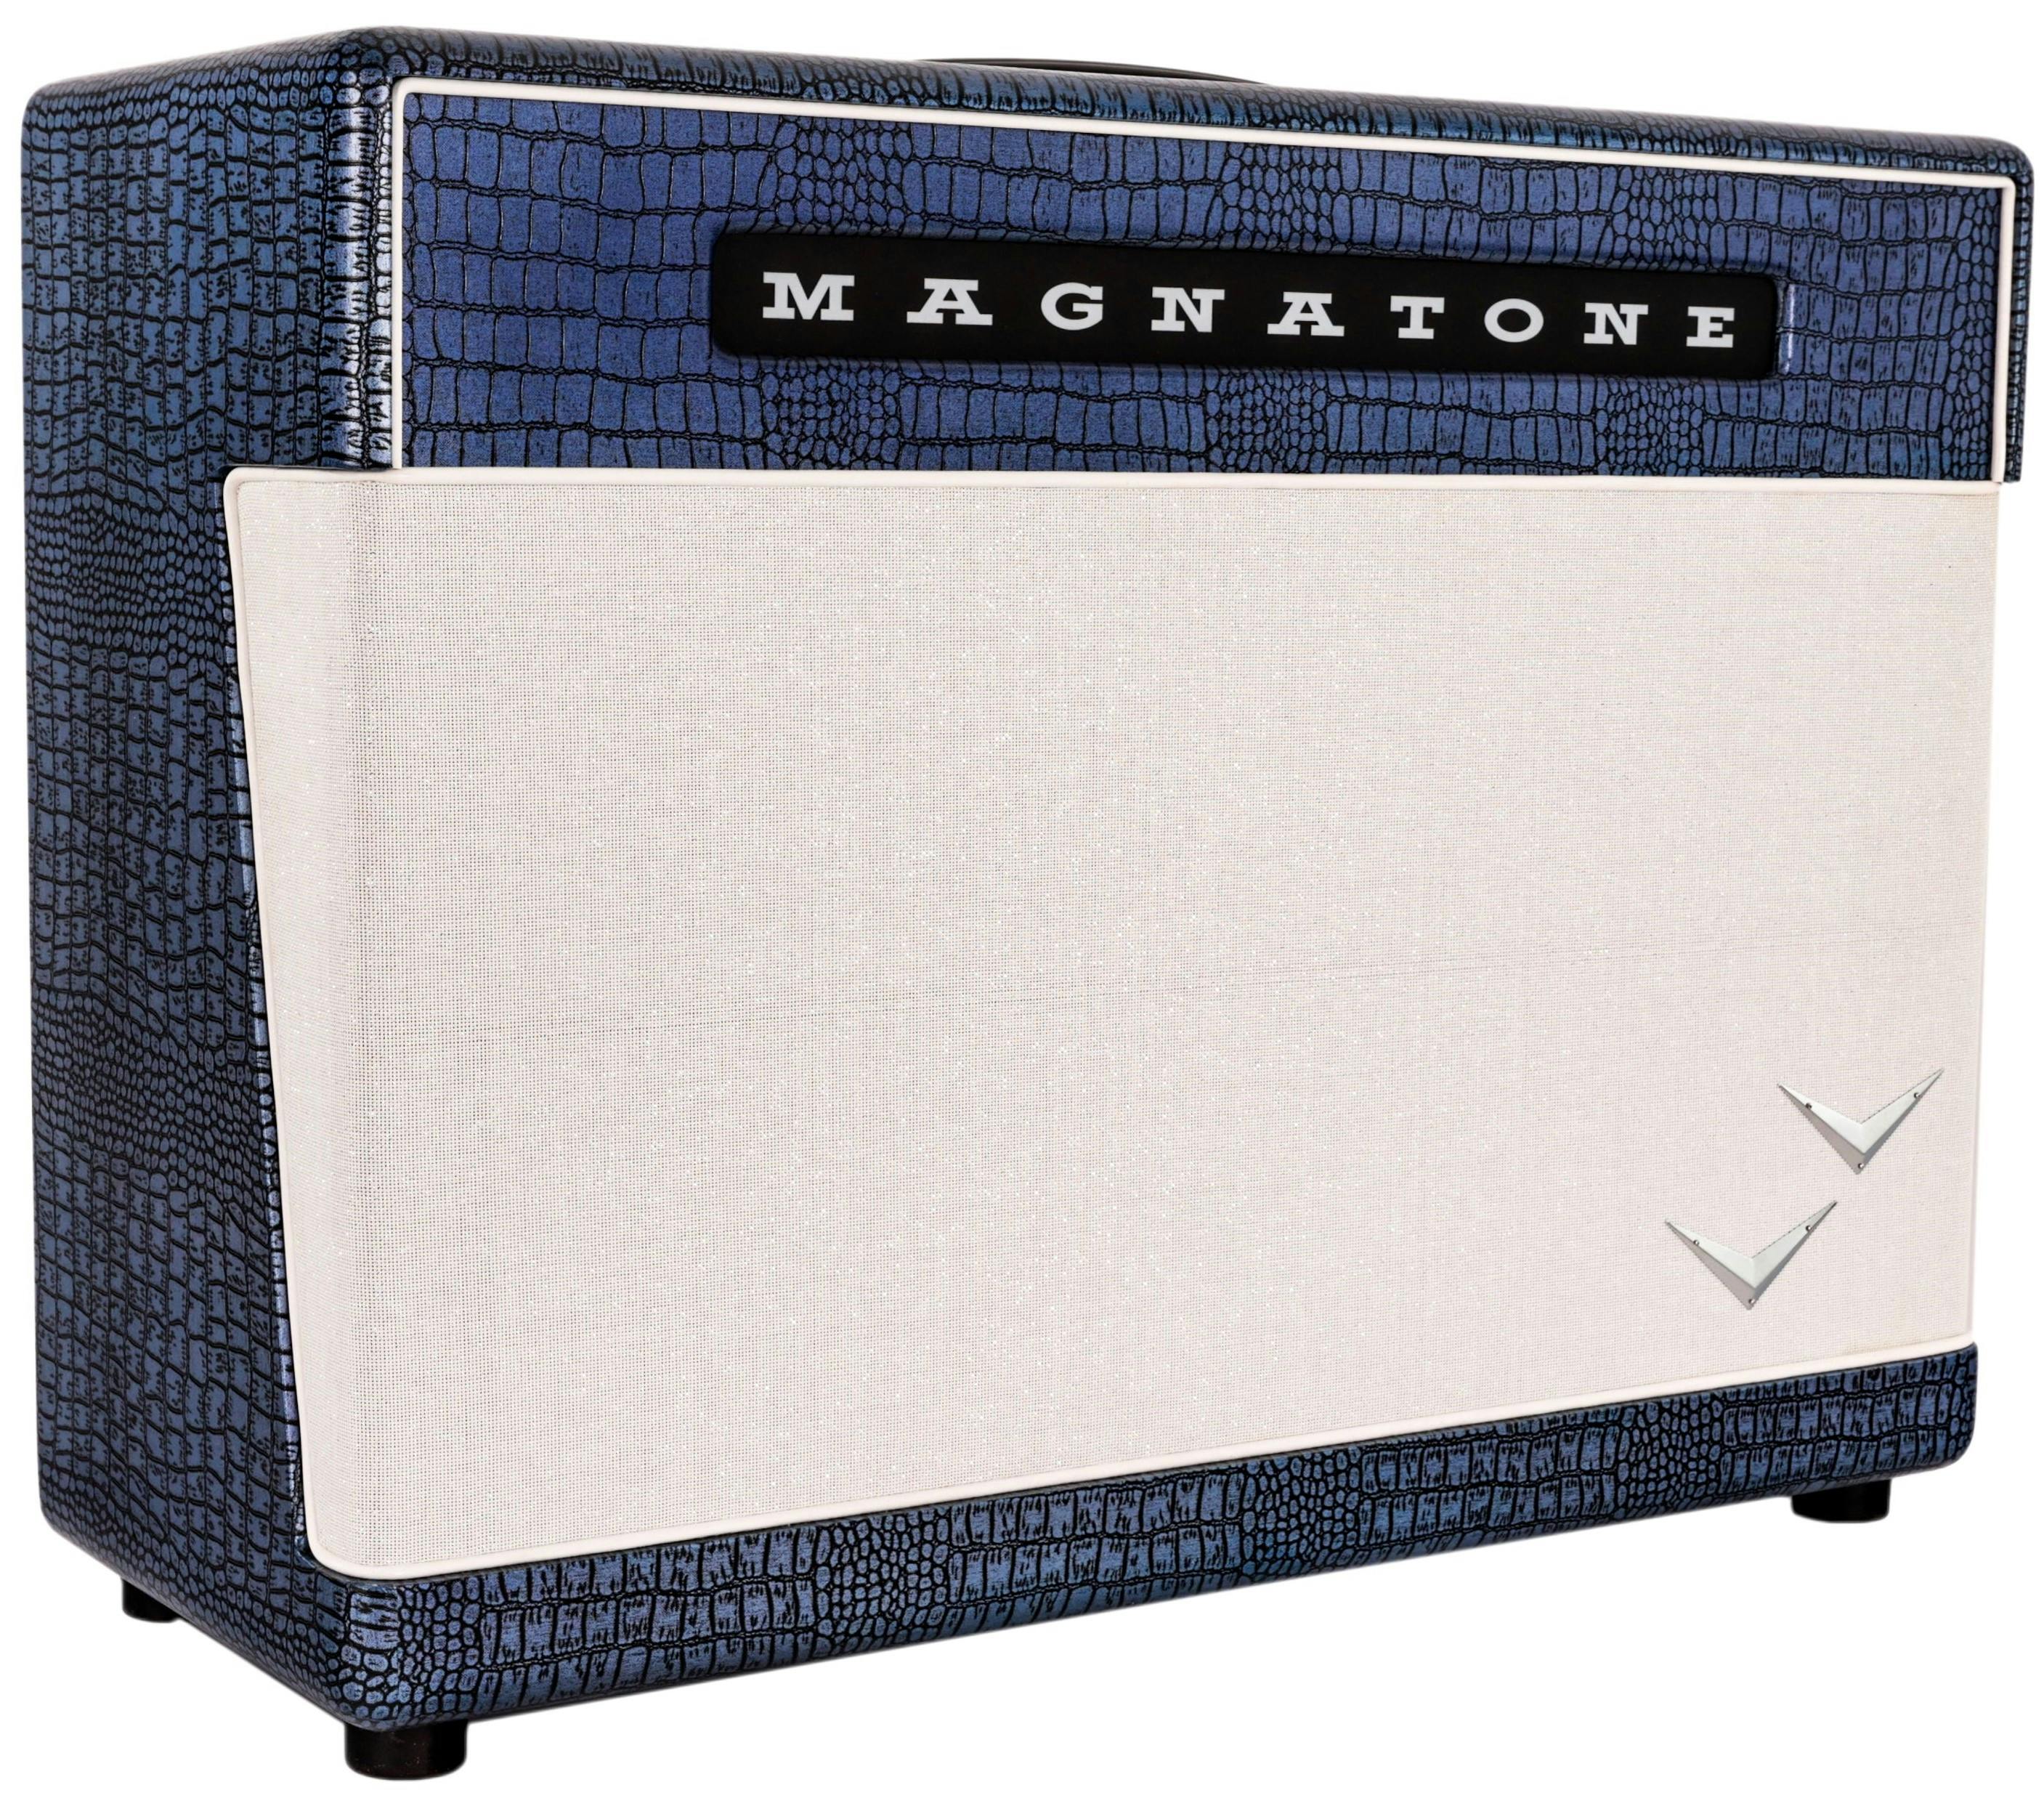 Magnatone Super Fifteen Limited Edition Head & 2x12 Cabinet in 